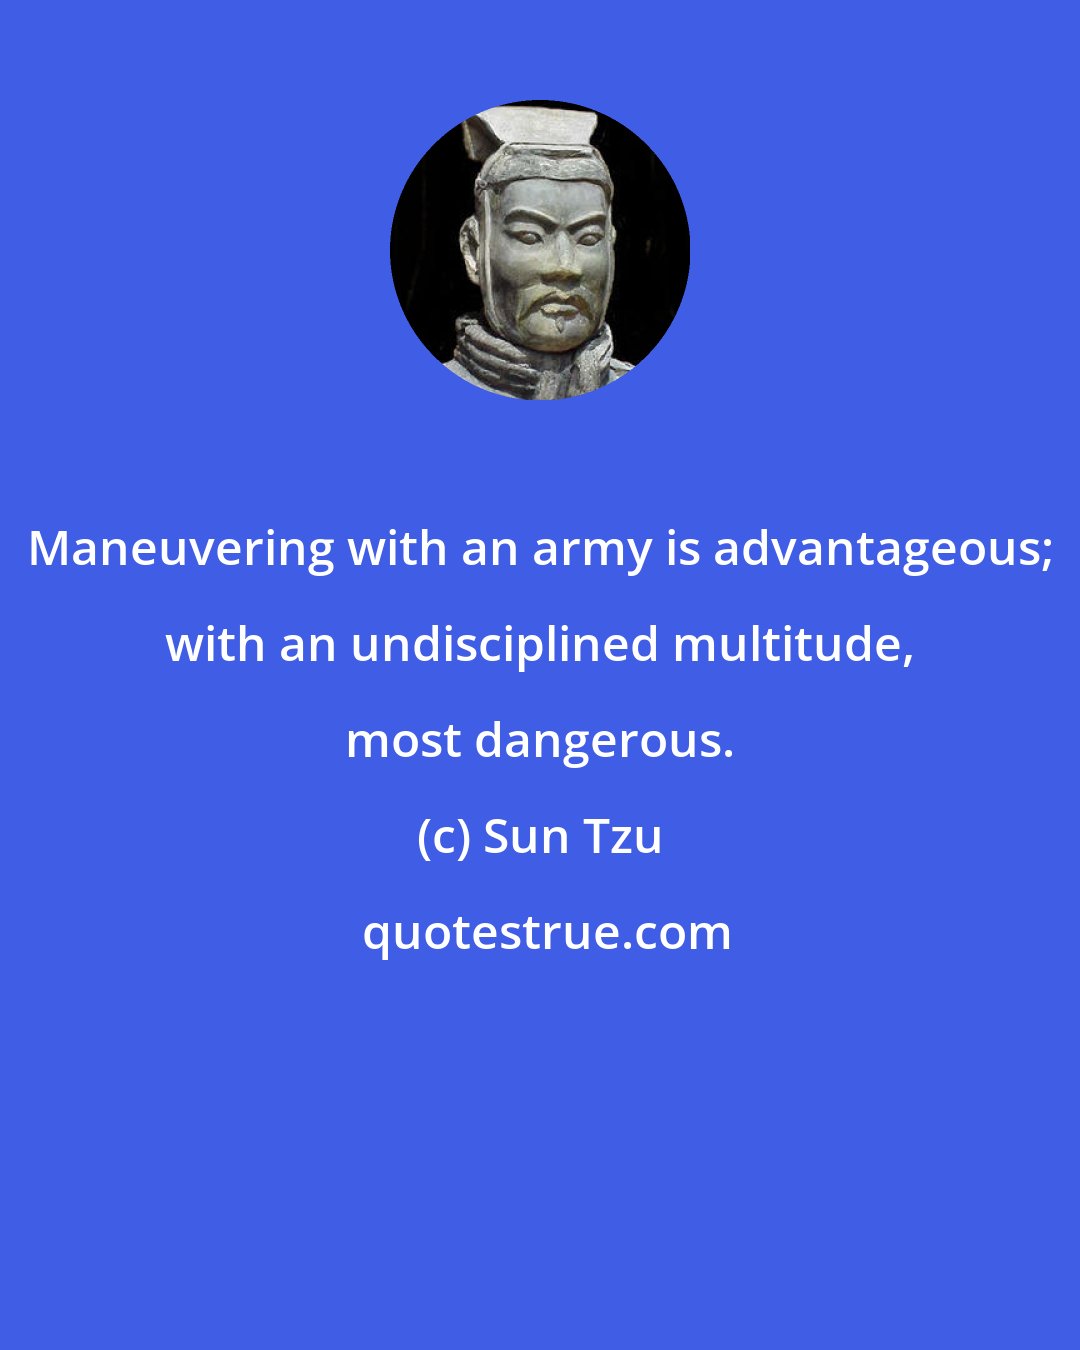 Sun Tzu: Maneuvering with an army is advantageous; with an undisciplined multitude, most dangerous.